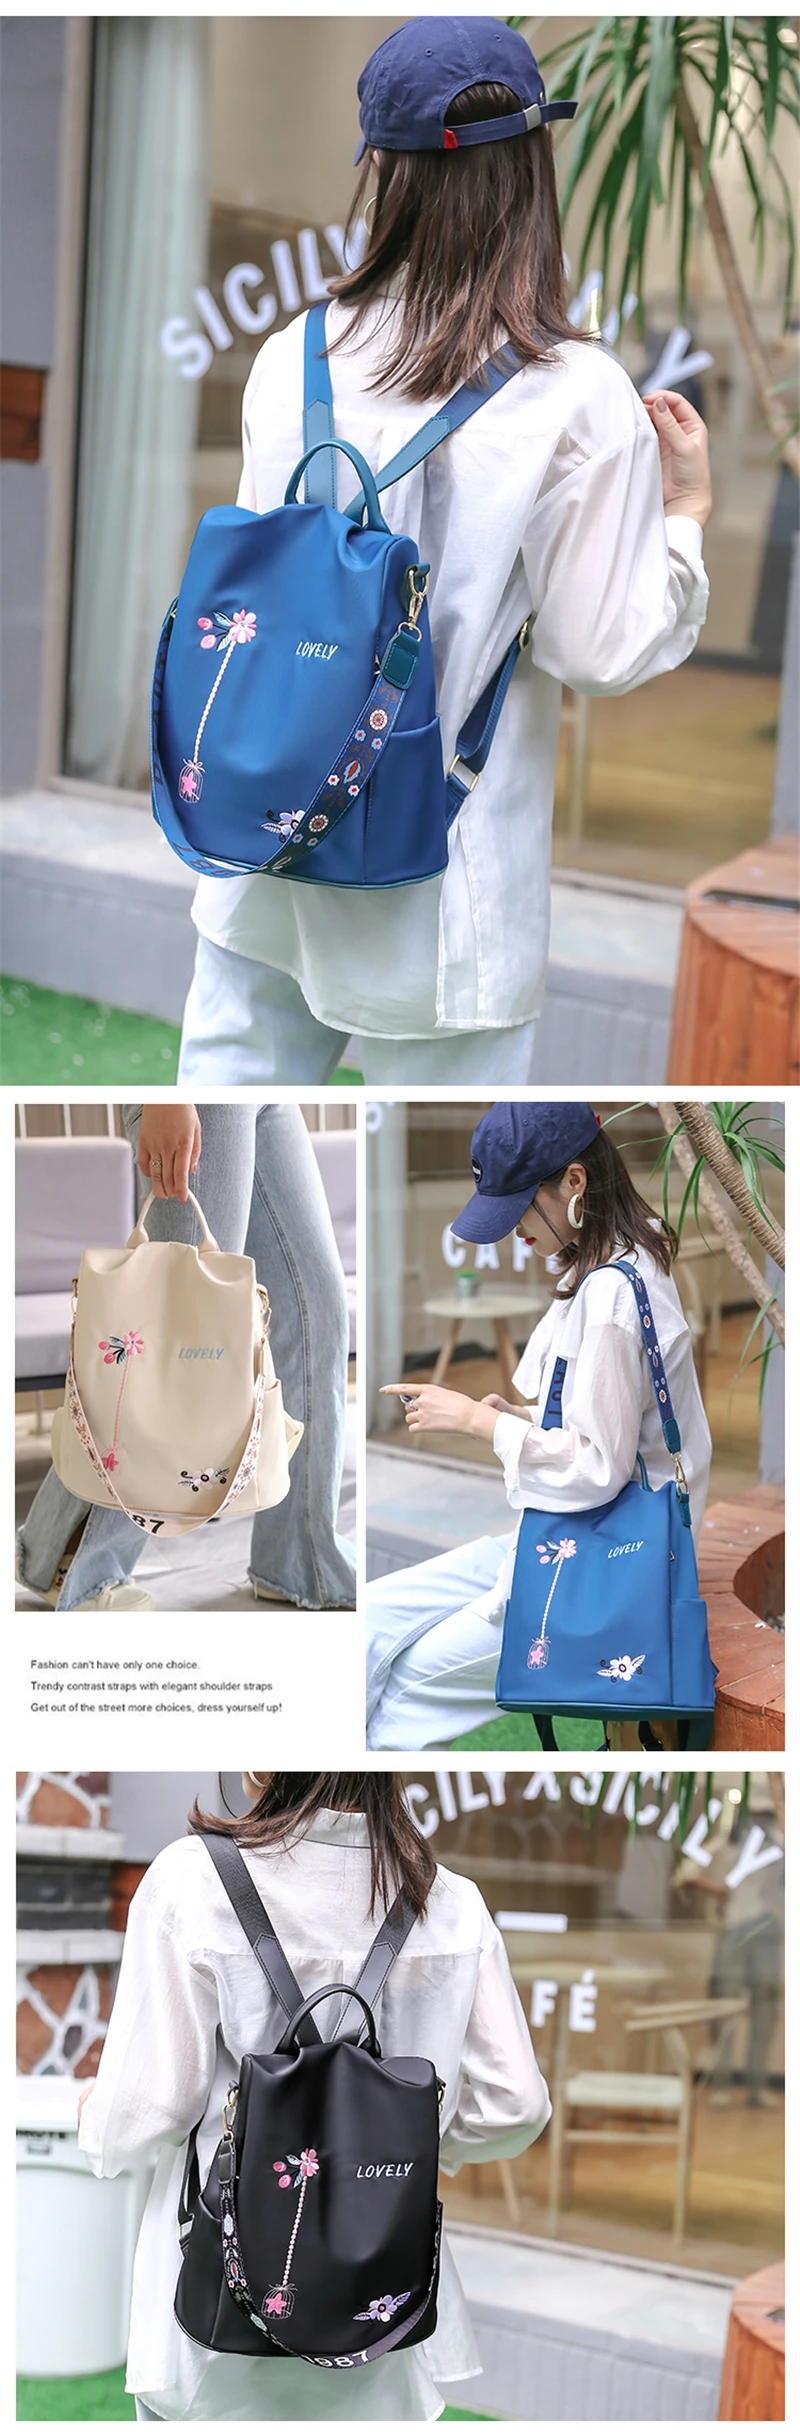 Wholesale Hot Products New 2020 High Quality College Bags Girls Bag